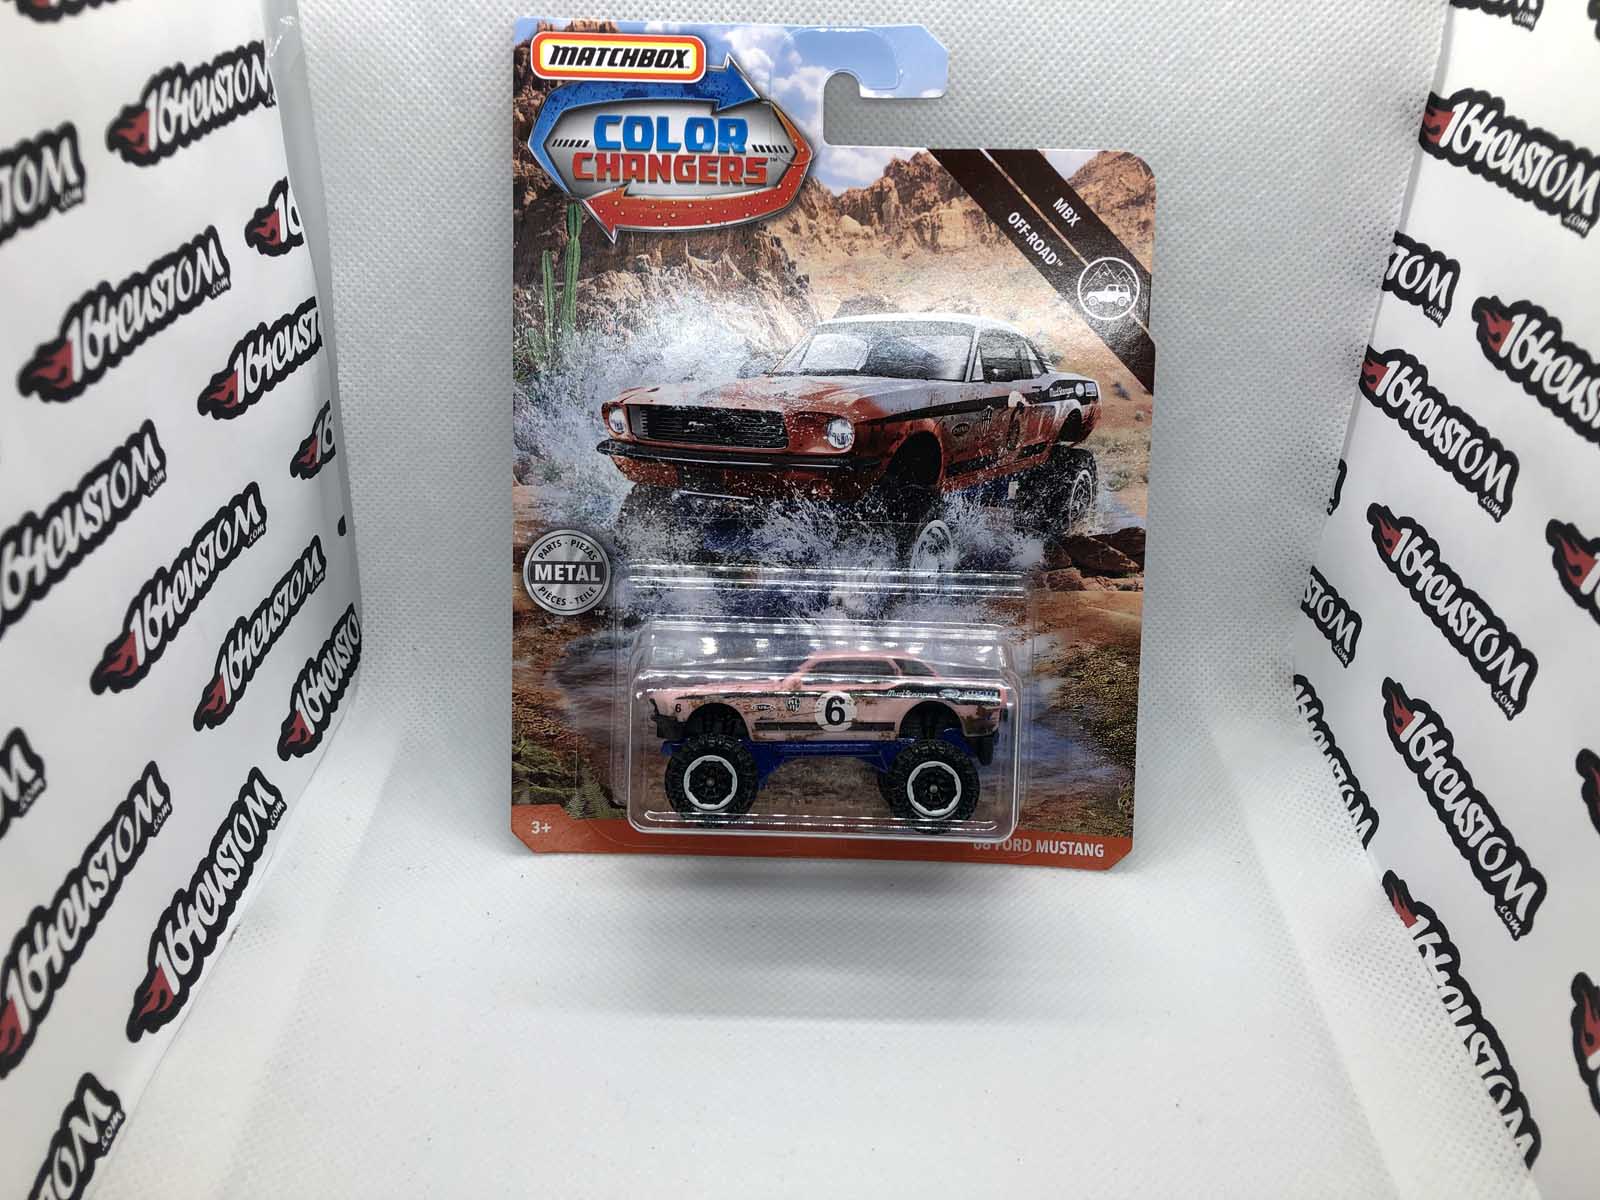 68 Ford Mustang Hot Wheels